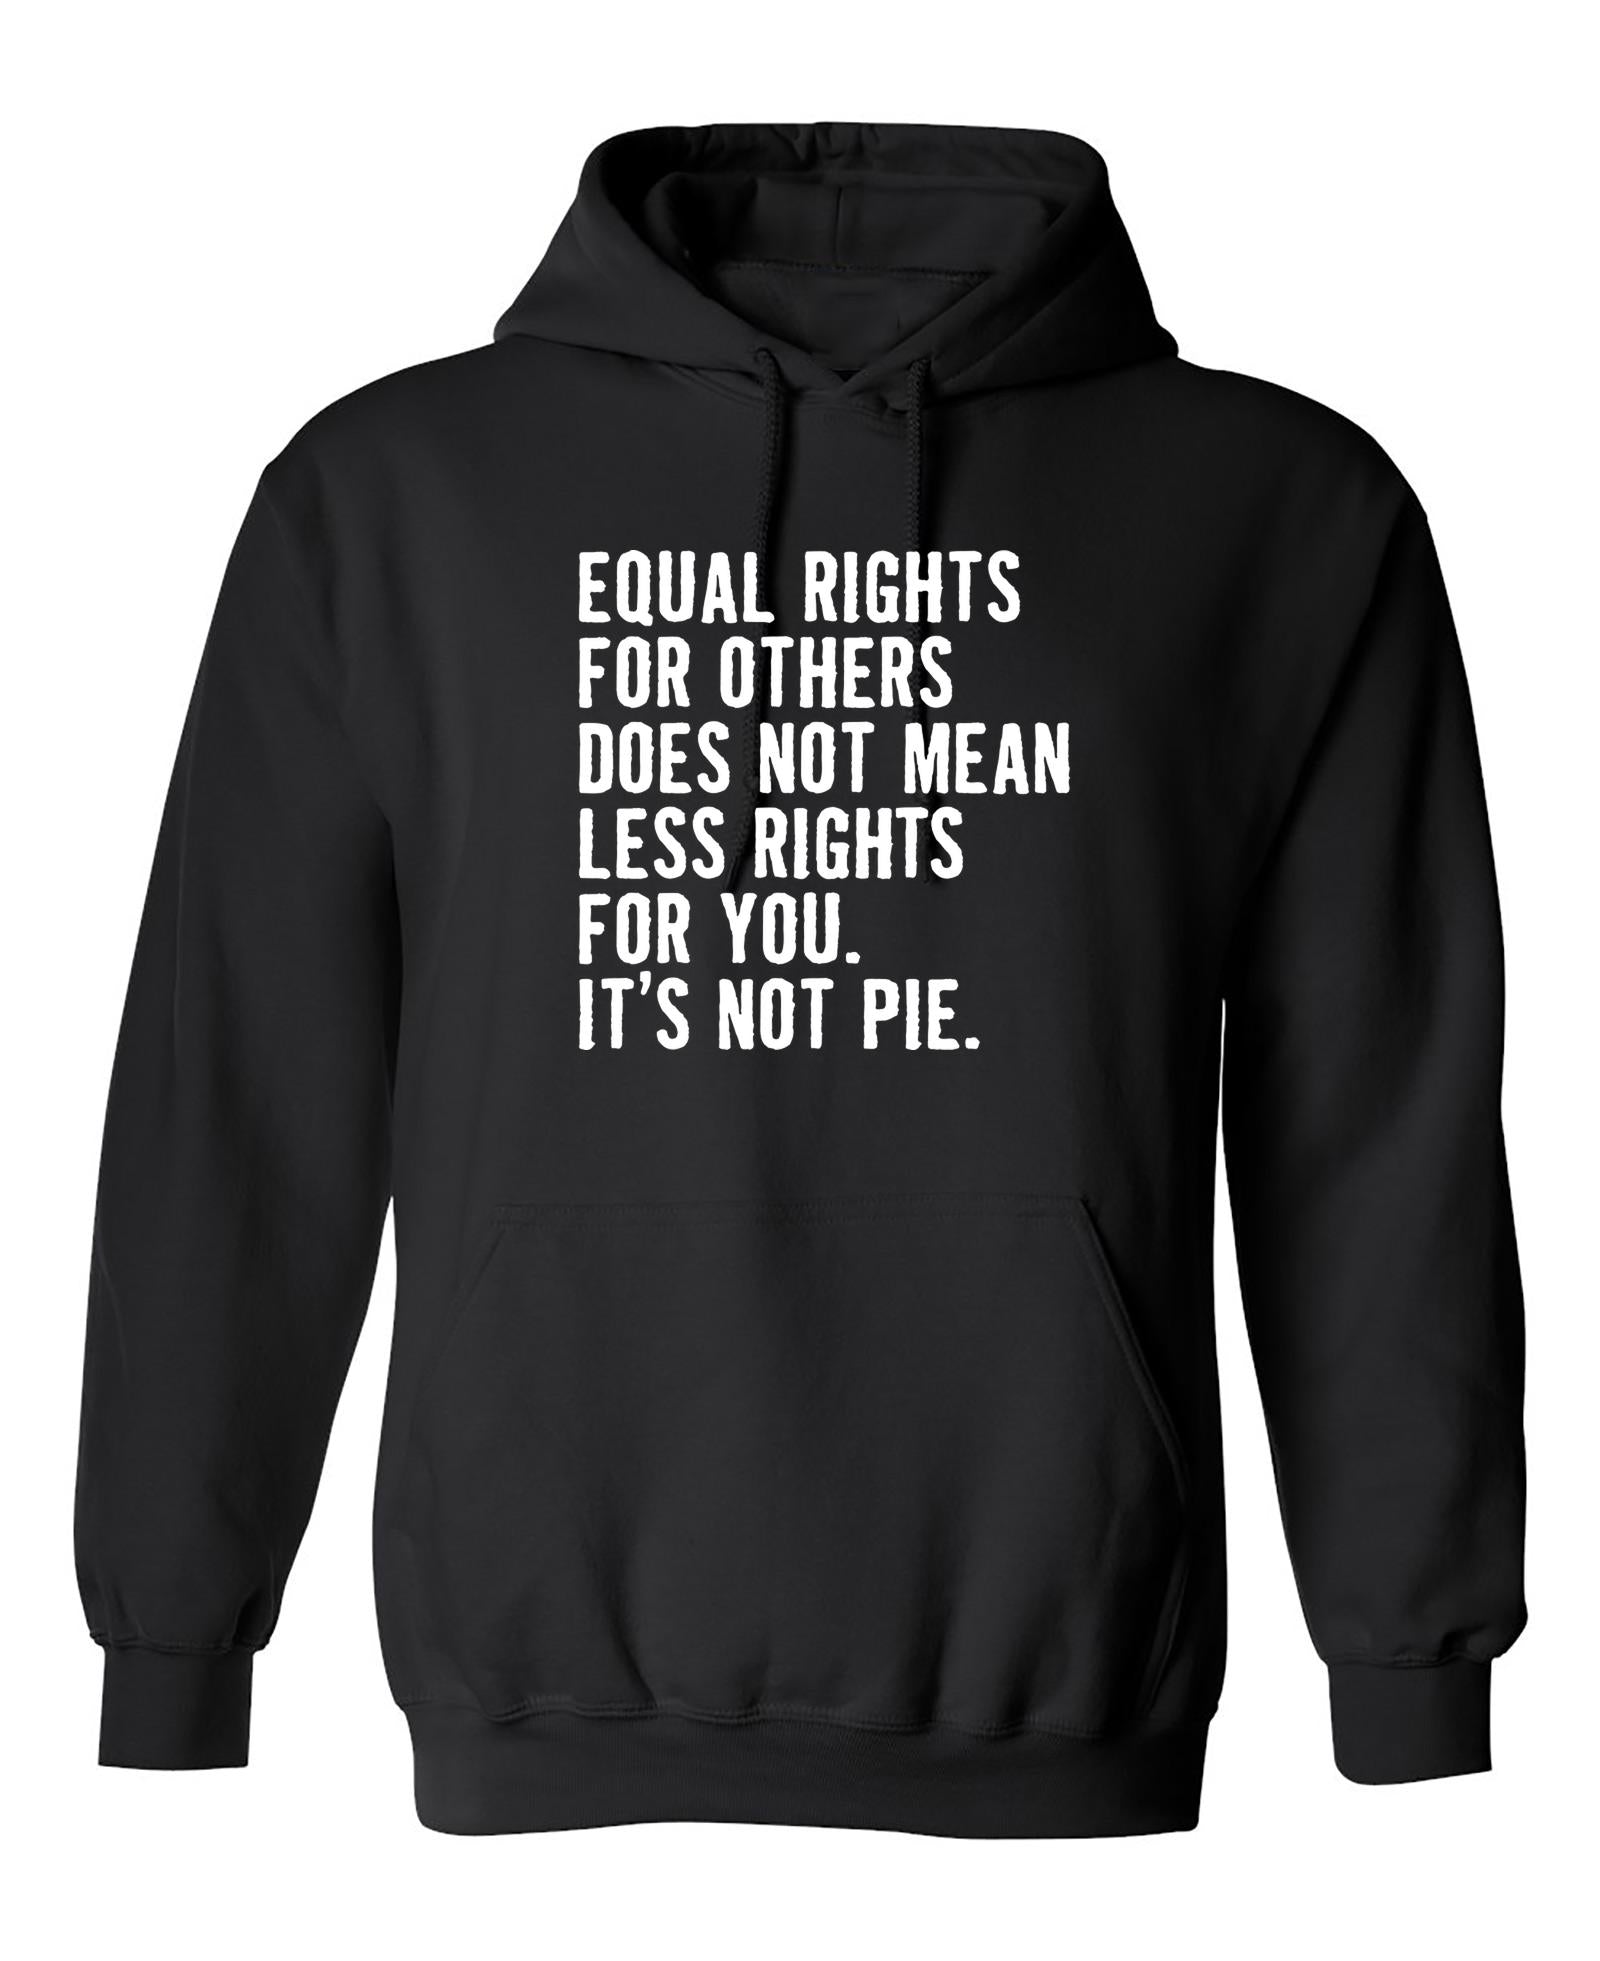 Funny T-Shirts design "Equal Rights For Other Does Not Mean Less Rights For You"